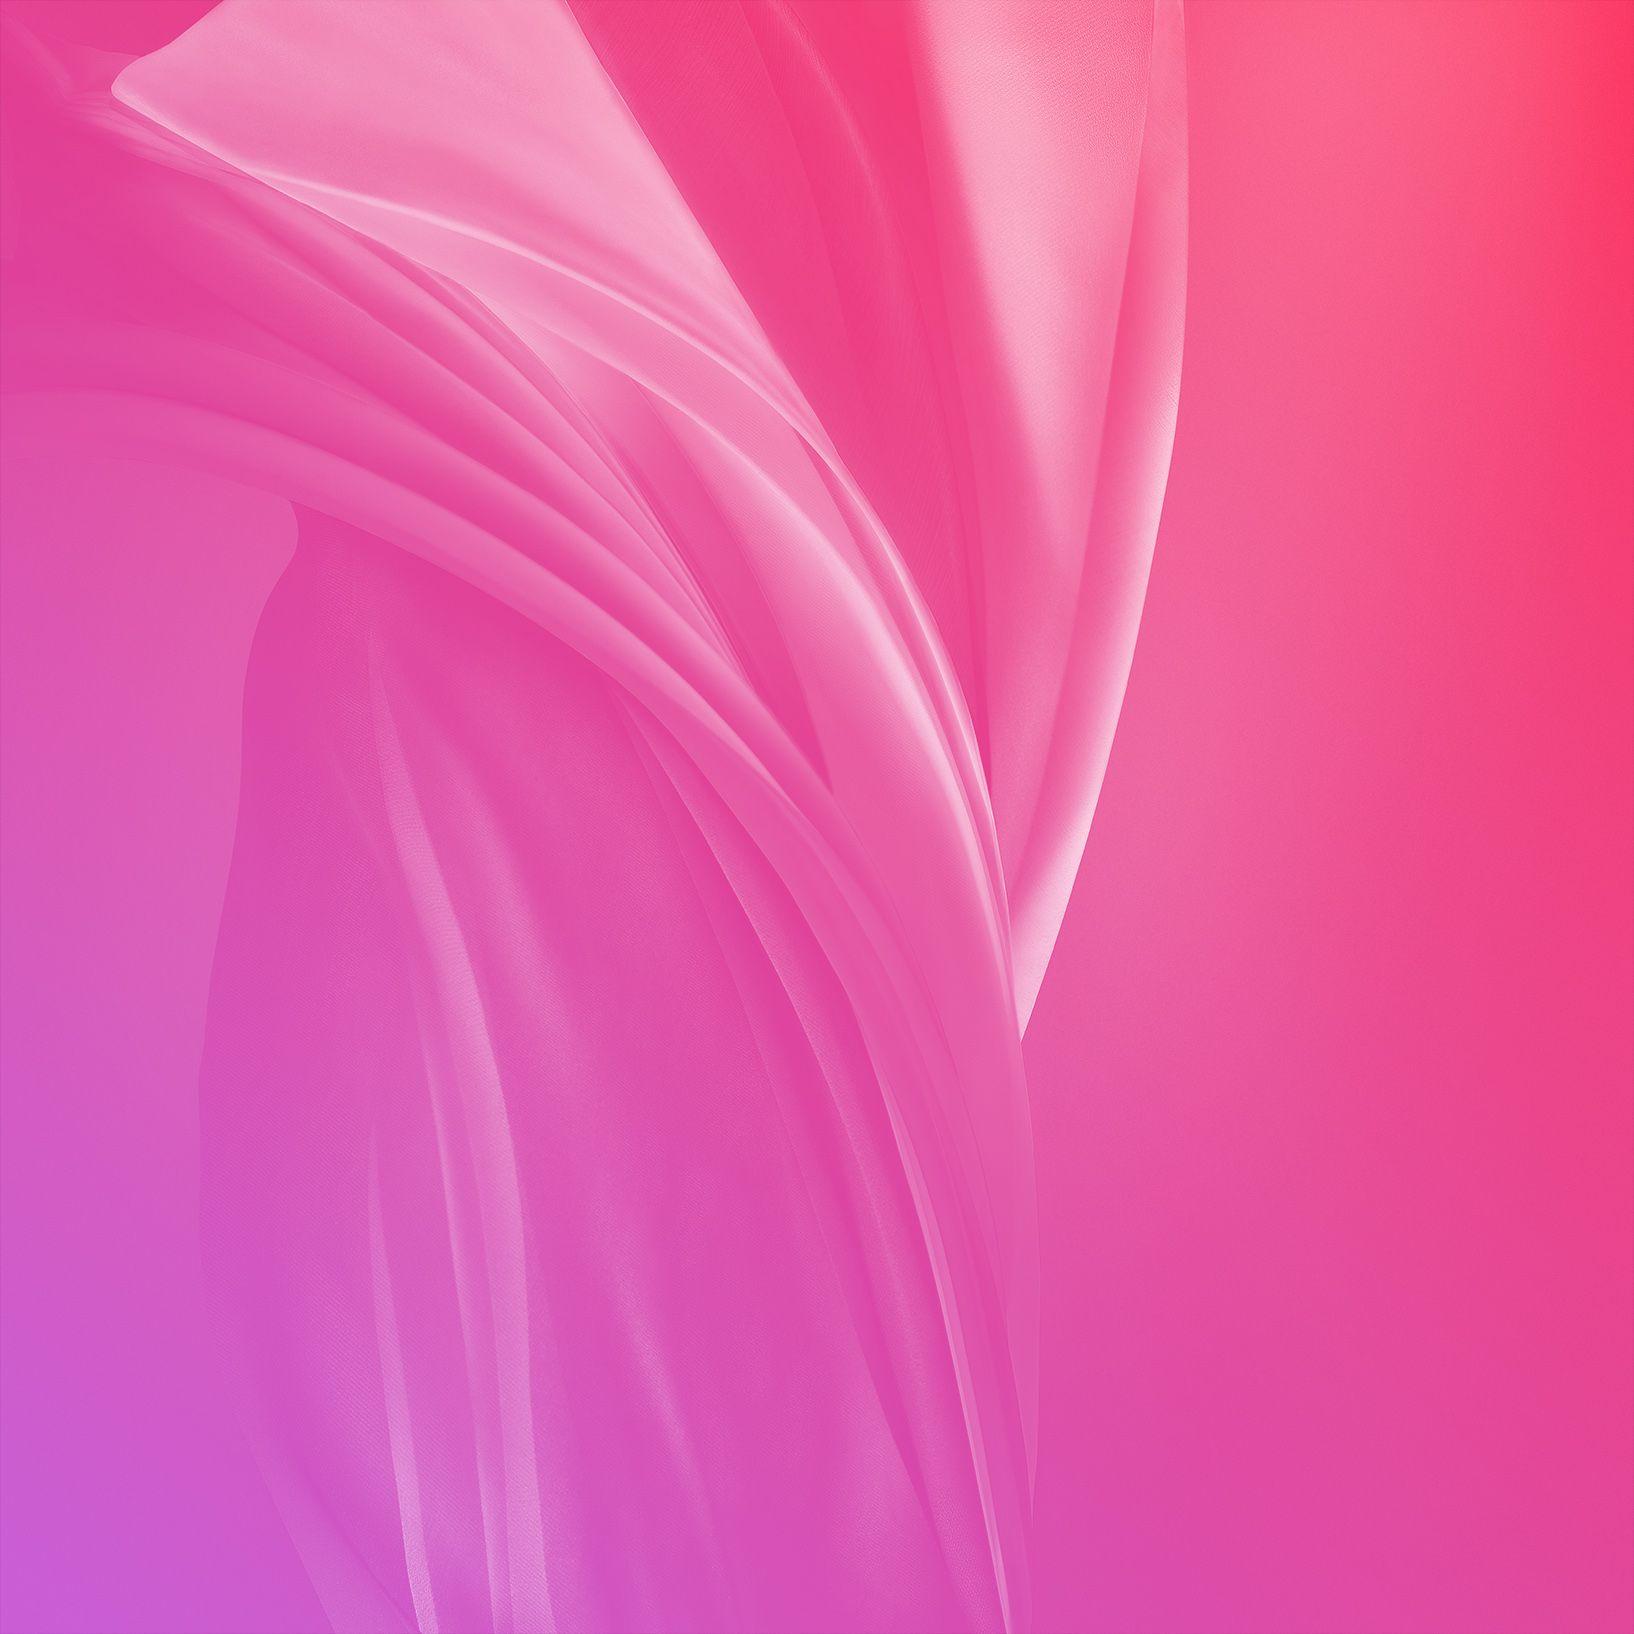 iPhone SE 2020 wallpapers AI upscaled and AI recolored/retextured in 4K/8K  : r/iphonewallpapers